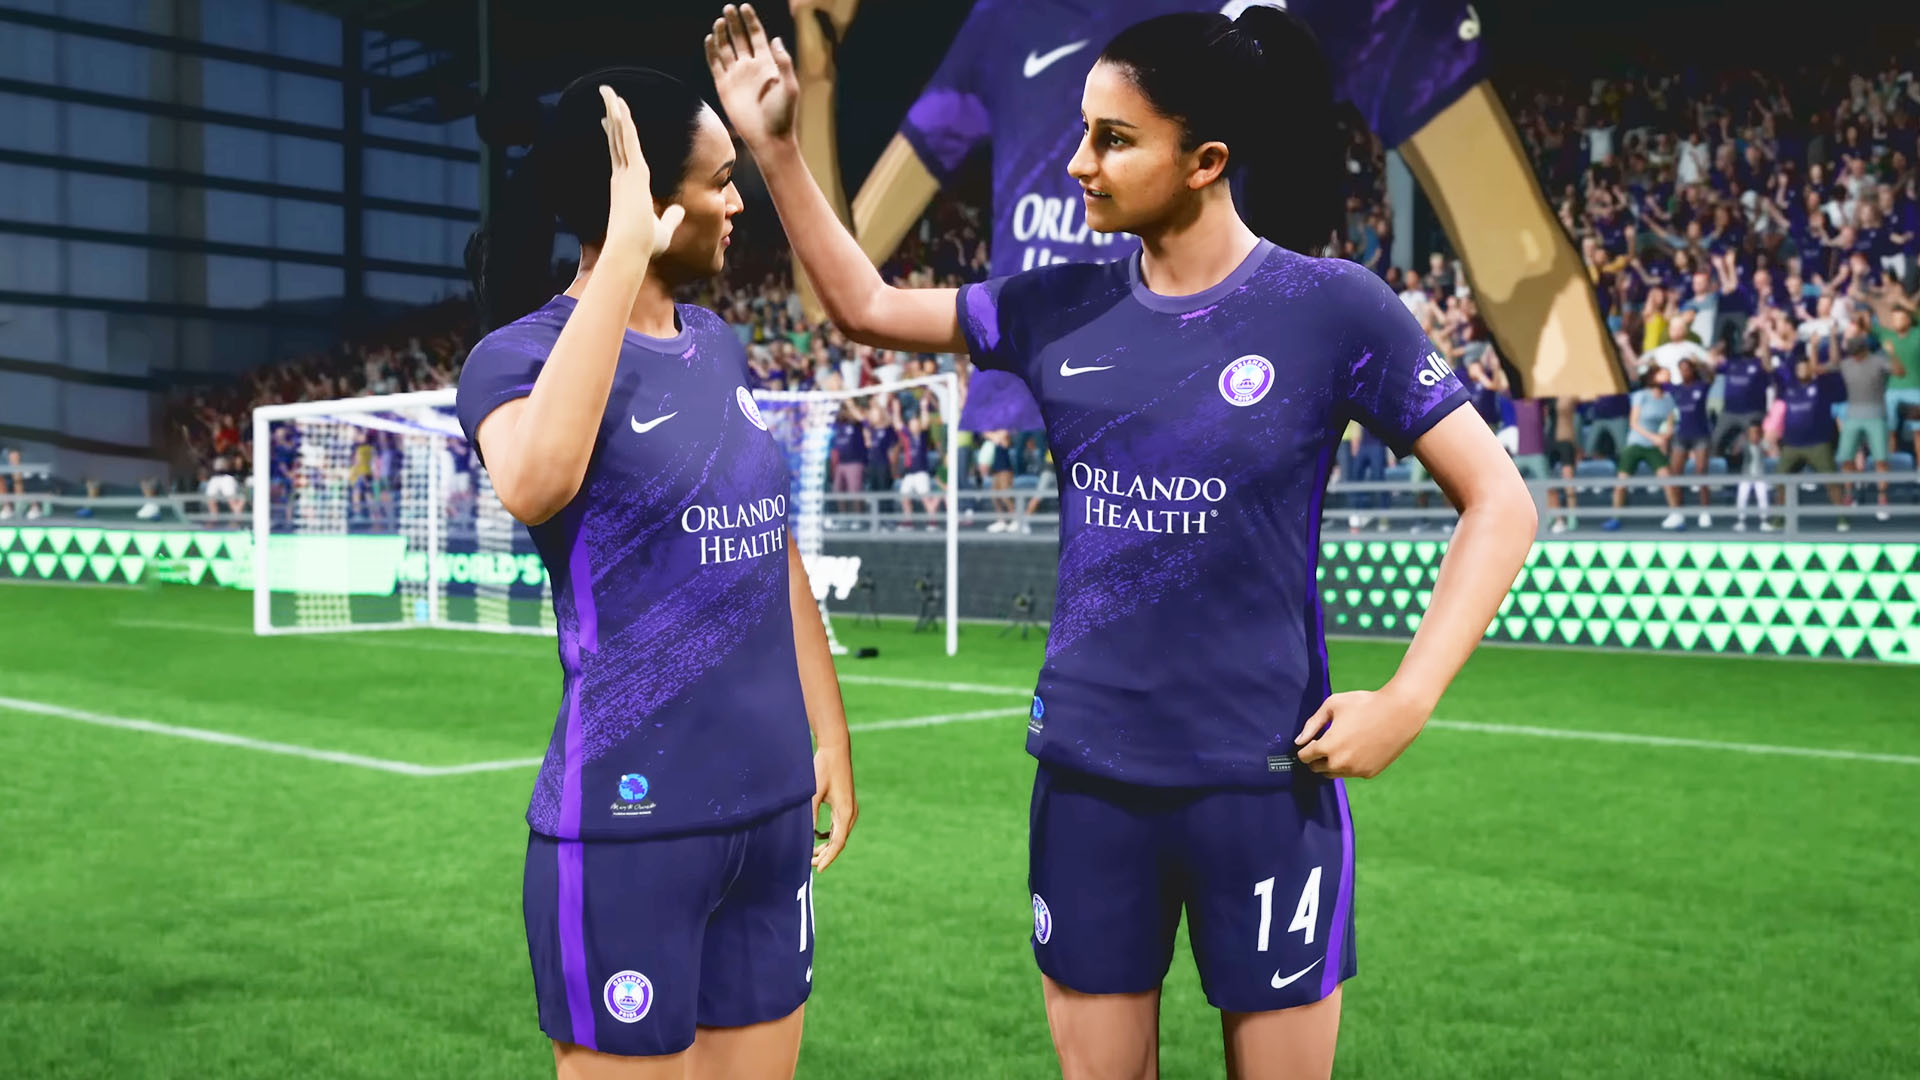 Crossplay in EA SPORTS FC 24: How it works, platforms and limitations -  Meristation